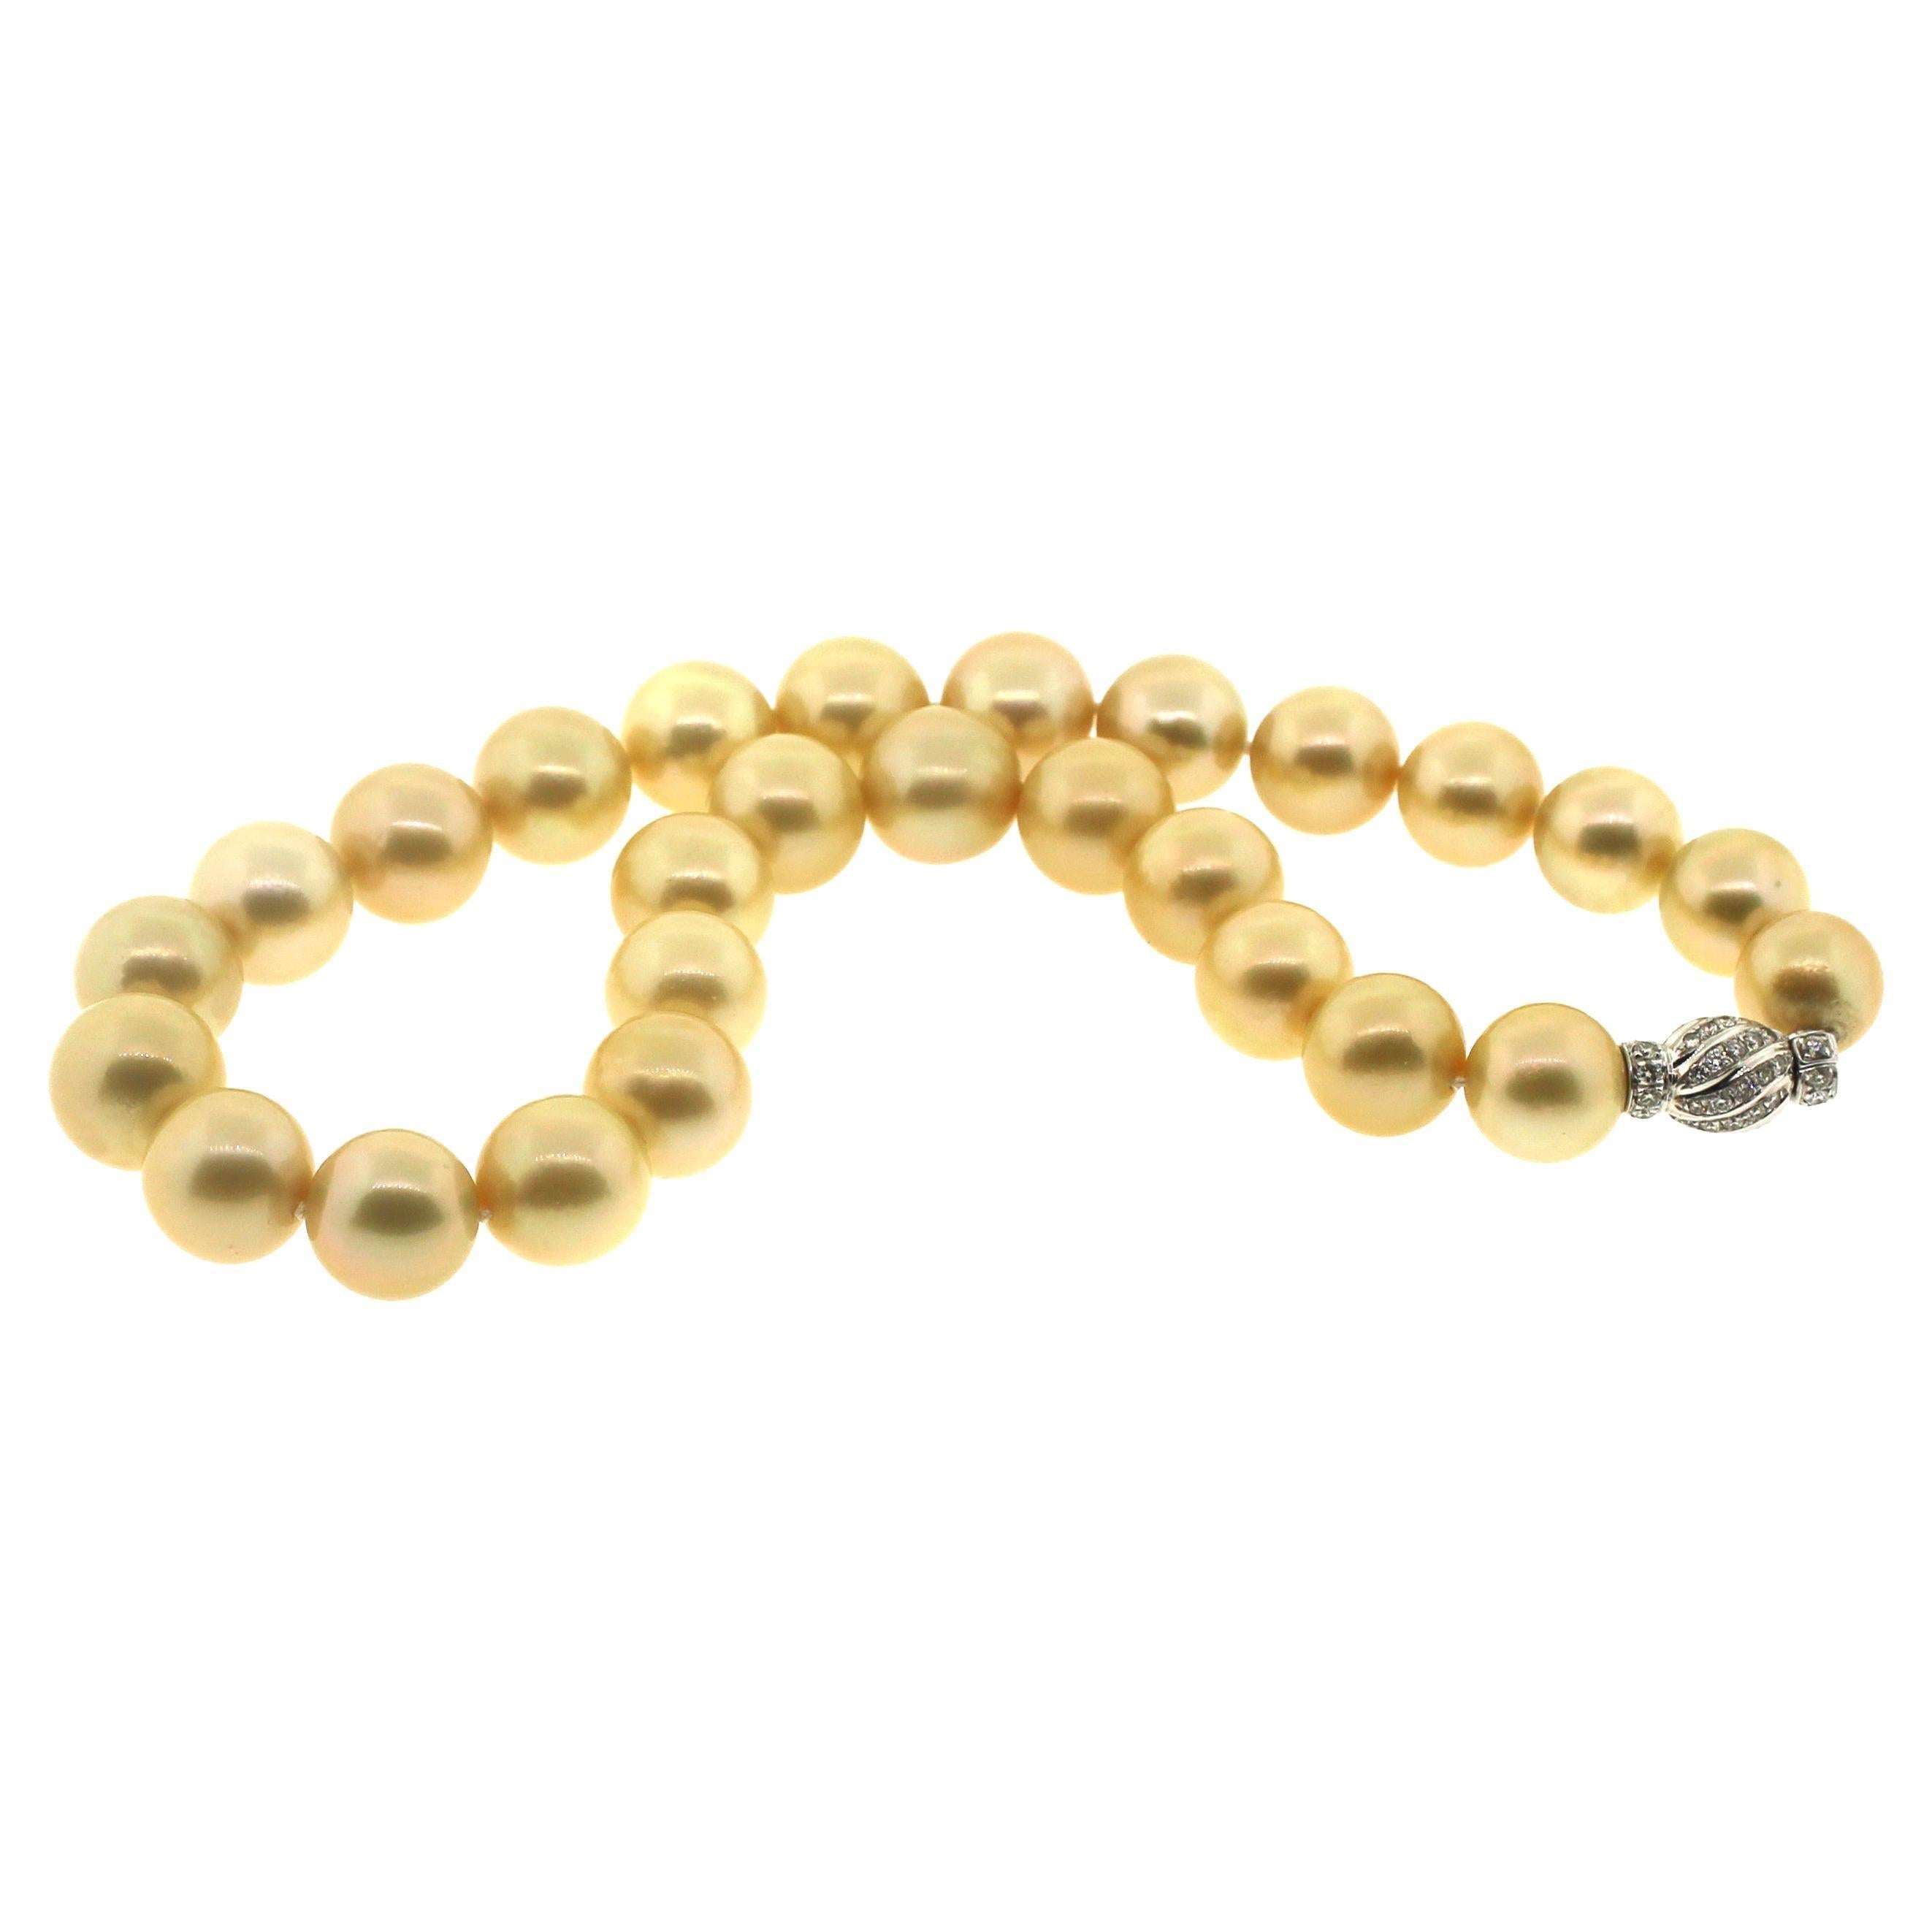 Bead Hakimoto 15.3x13 mm 27 Golden South Sea Pearl Necklace 18K Diamond Clasp For Sale